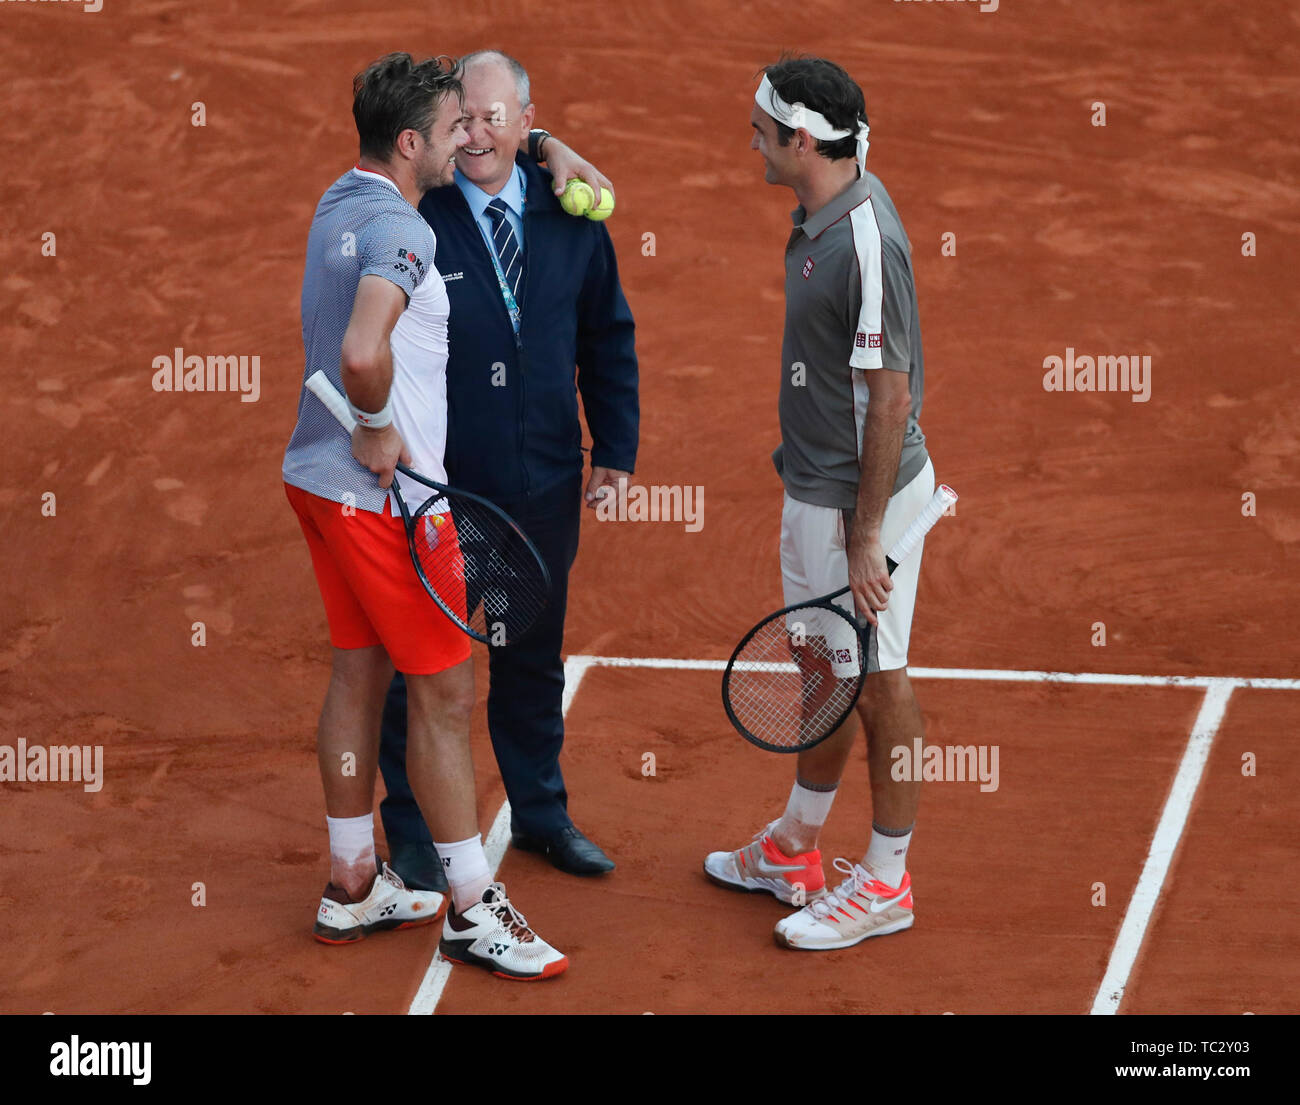 Paris, Paris. 4th June, 2019. Roger Federer (R) of Switzerland and his  compatriot Stan Wawrinka speak with the match supervisor during the men's  singles quarterfinal match at French Open tennis tournament 2019